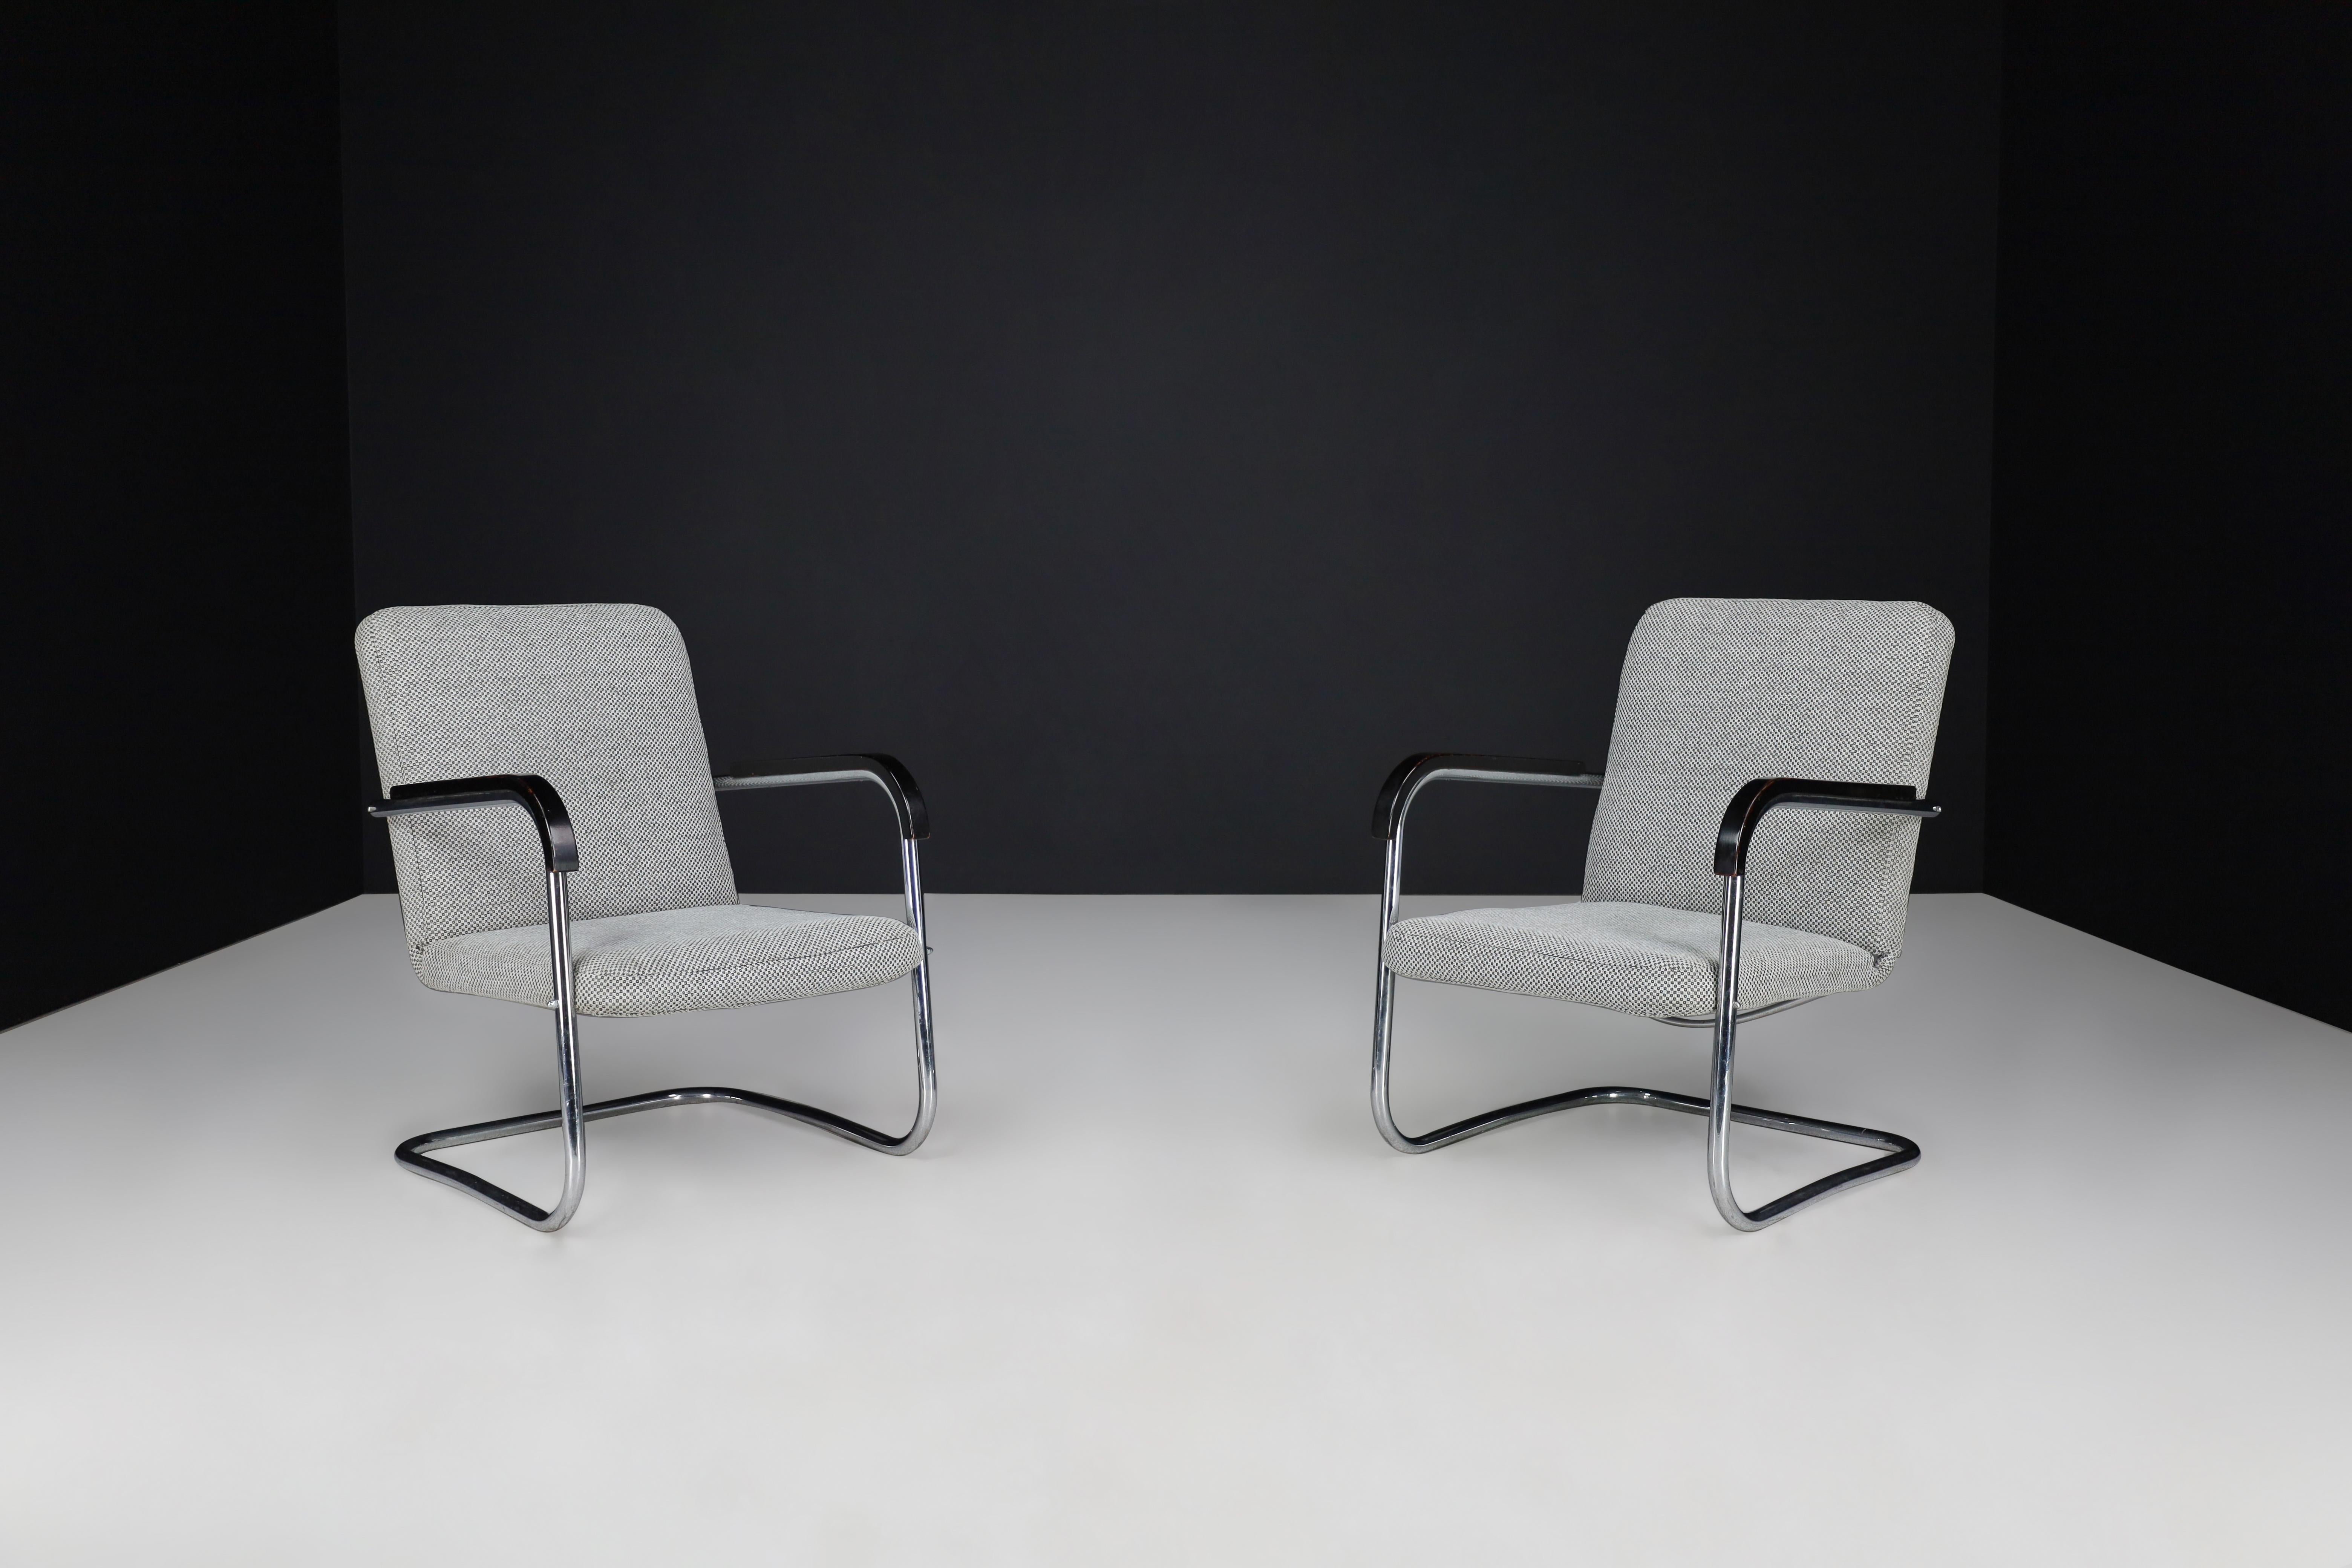 Thonet Chrome Steel Cantilever Armchairs 1930s Midcentury Bauhaus period.

Pair of armchairs by Thonet circa 1930s midcentury Bauhaus period. These cantilever armchairs are typical for the German and Eastern Europe Bauhaus era. These armchairs has a